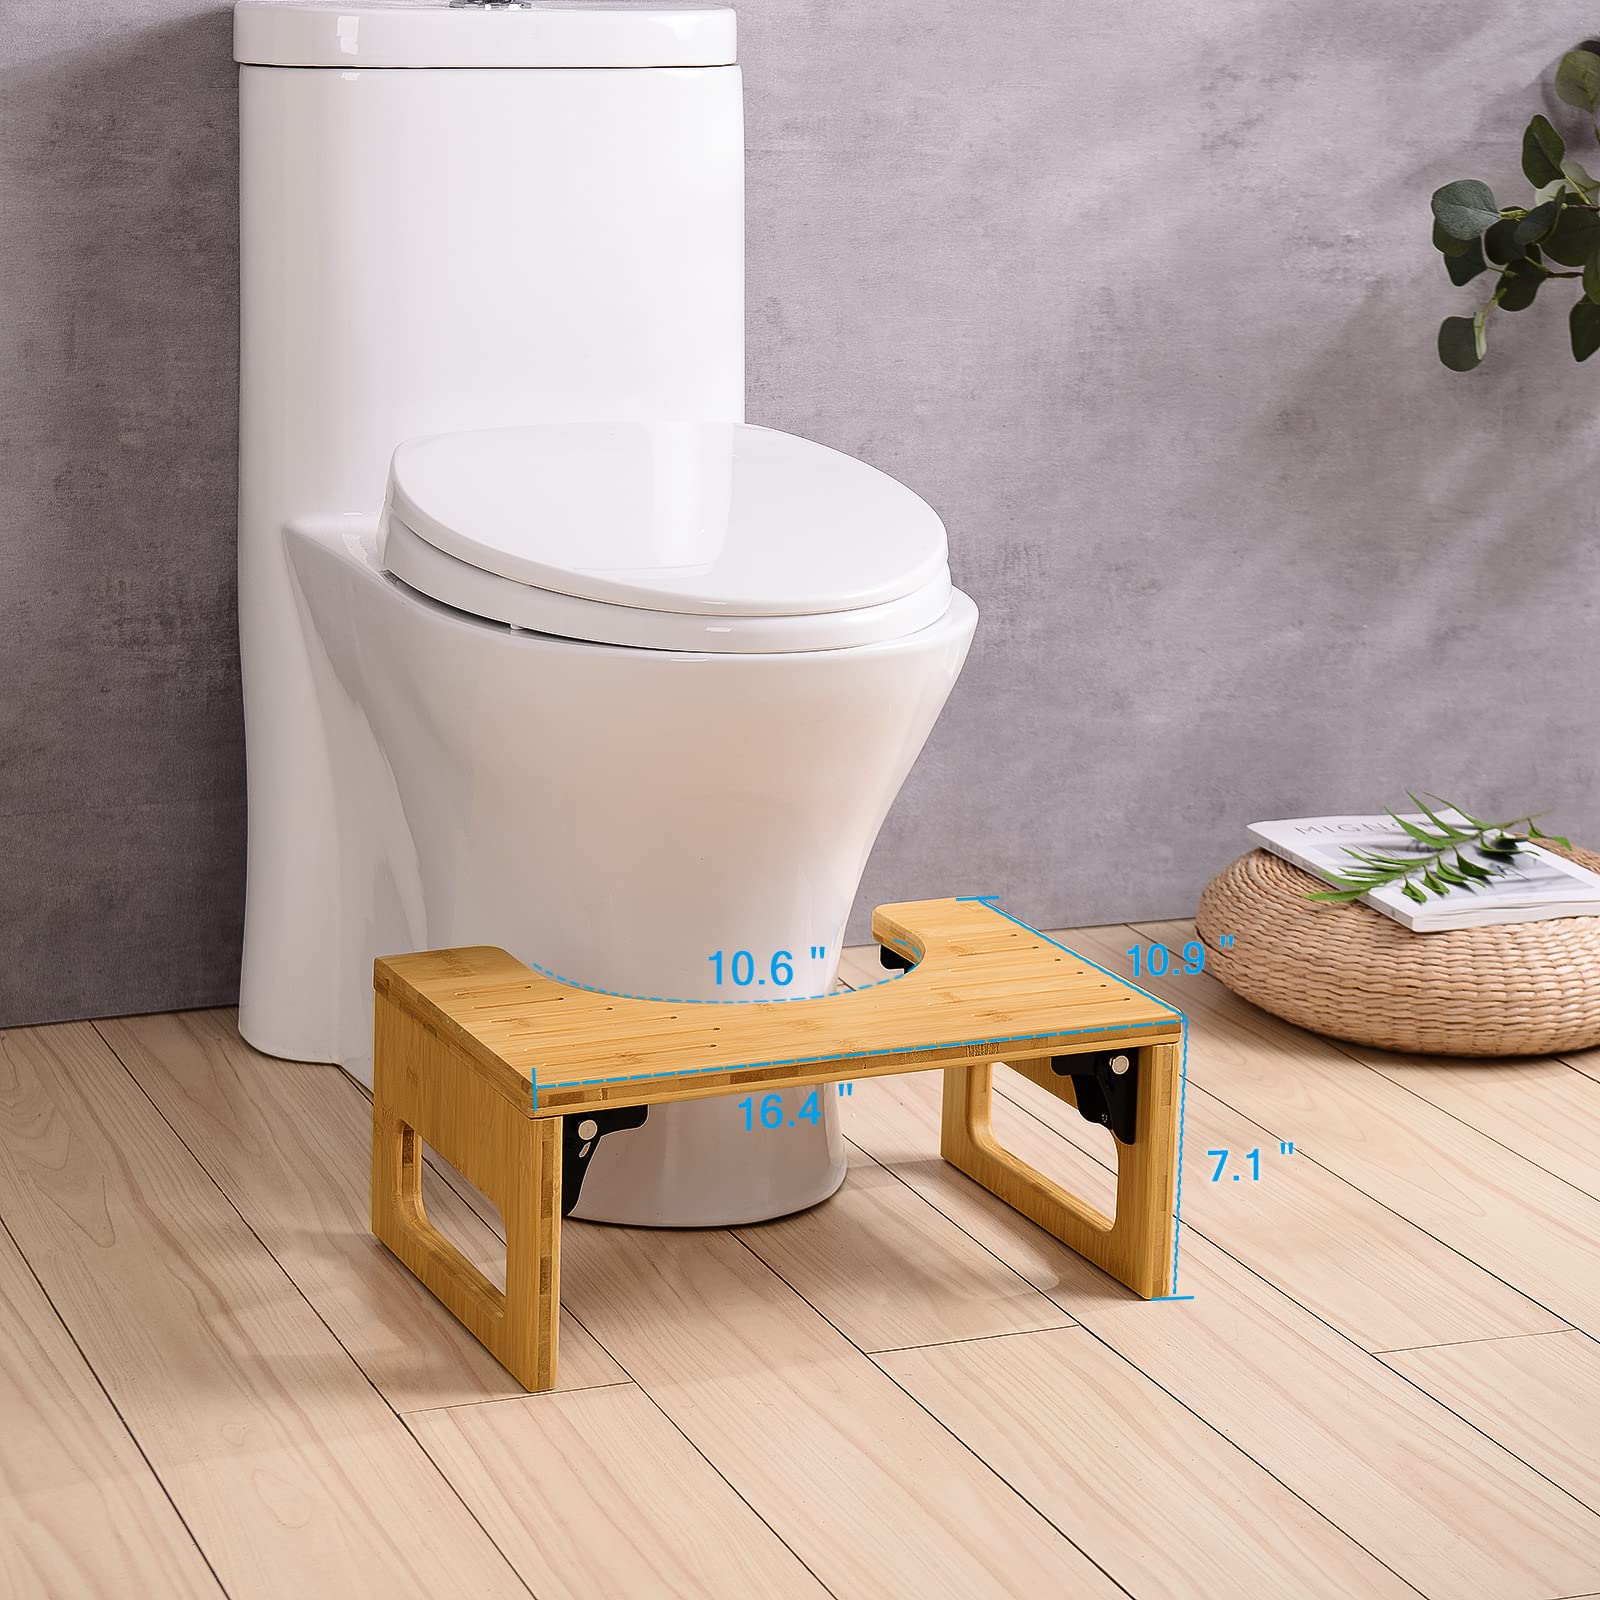 AmazerBath 7 Inches Bamboo Toilet Stool for Bathroom, Collapsible Poop Stool, Natural Color